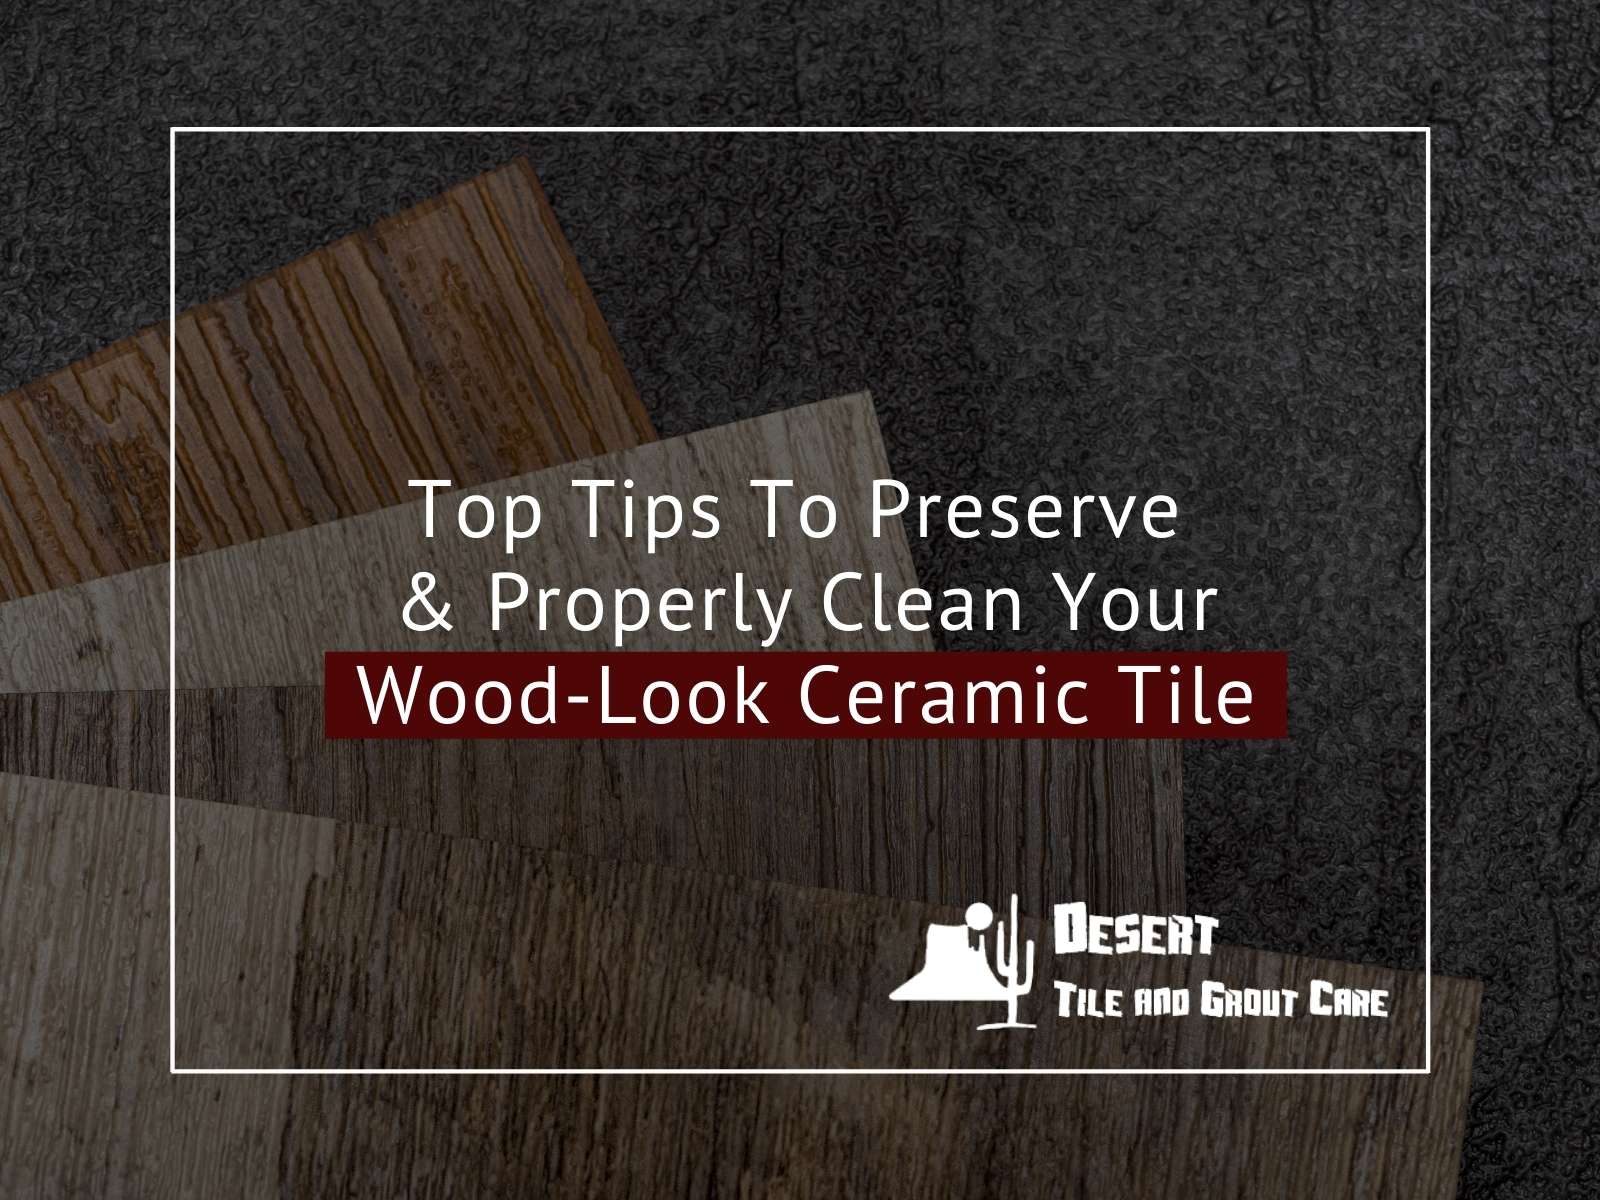 https://www.deserttileandgrout.com/wp-content/uploads/2022/05/Top-Tips-To-Preserve-Properly-Clean-Your-Wood-Look-Ceramic-Tile.jpg